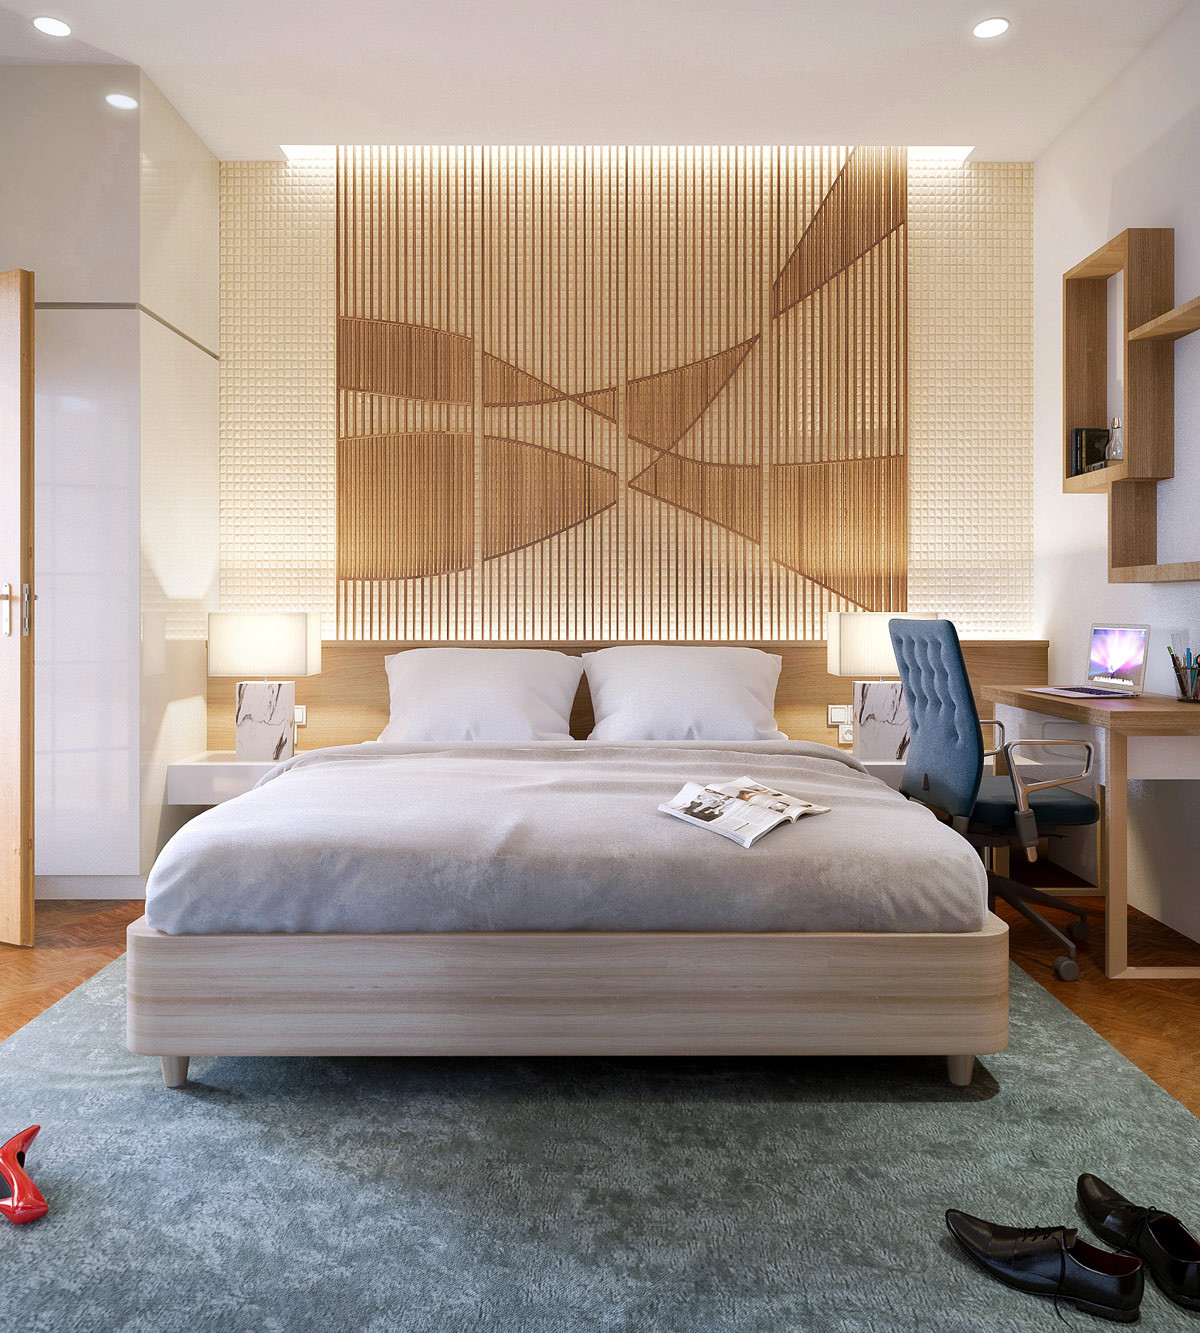 Wooden Accent Wall Bedroom
 25 Beautiful Examples Bedroom Accent Walls That Use